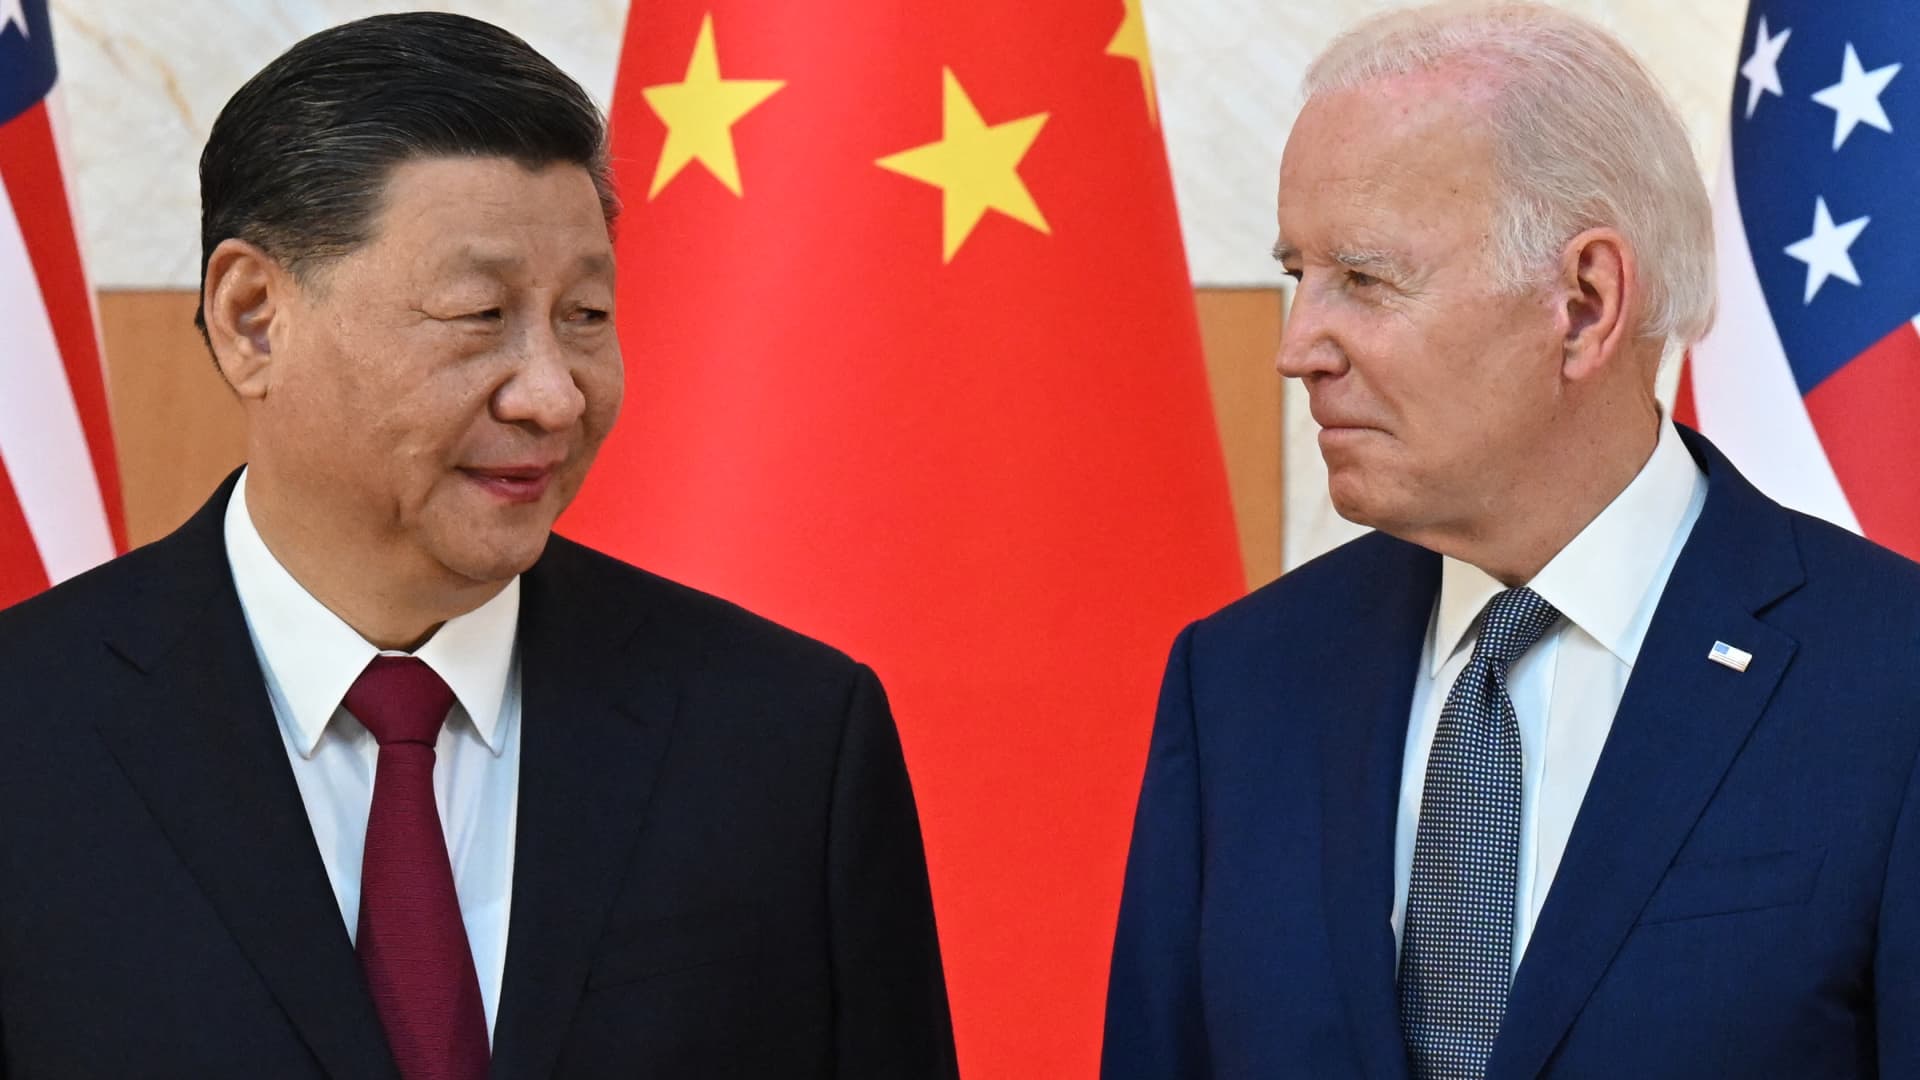 Photo of U.S.-China relations are on a ‘dangerous’ path with ‘no trust’ between them, experts warn